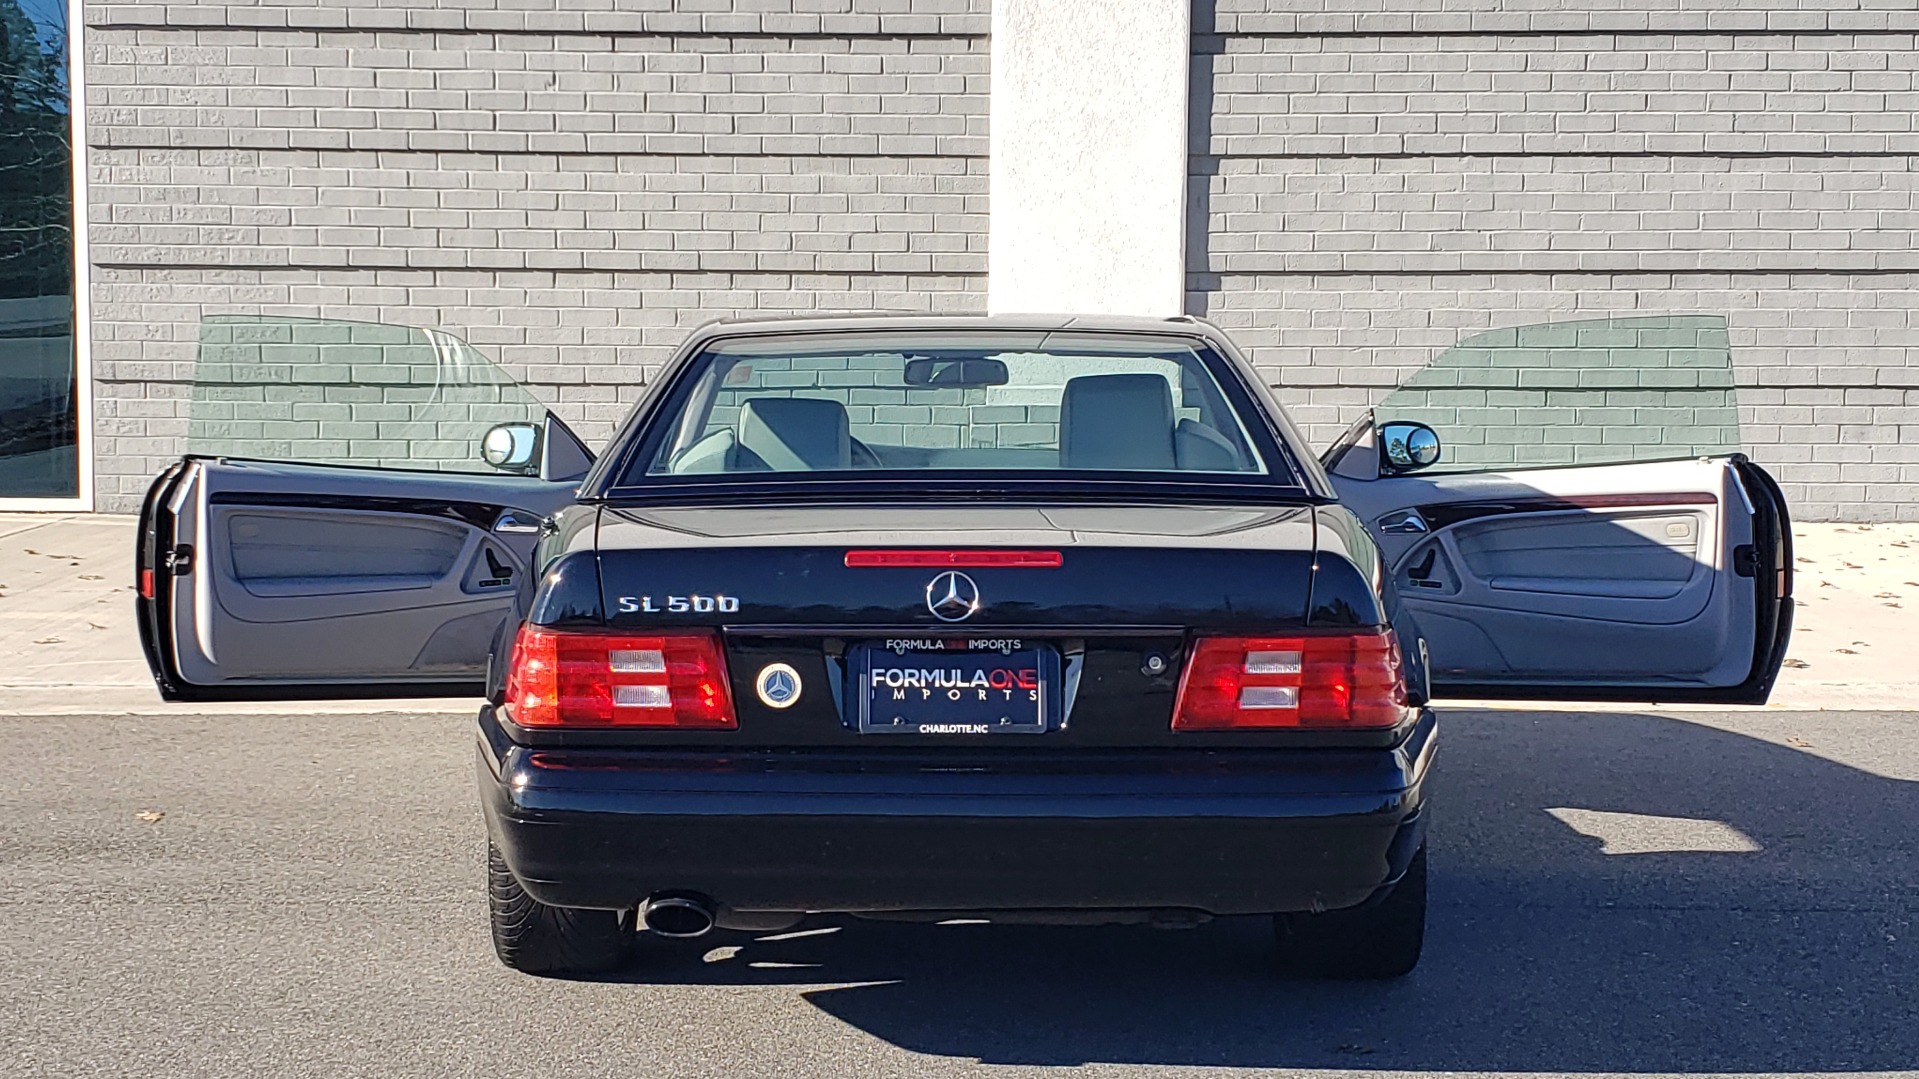 Used 1999 Mercedes-Benz SL-CLASS ROADSTER / 5.0L V8 (302HP) / 5-SPD AUTO / 18IN WHEELS for sale Sold at Formula Imports in Charlotte NC 28227 20